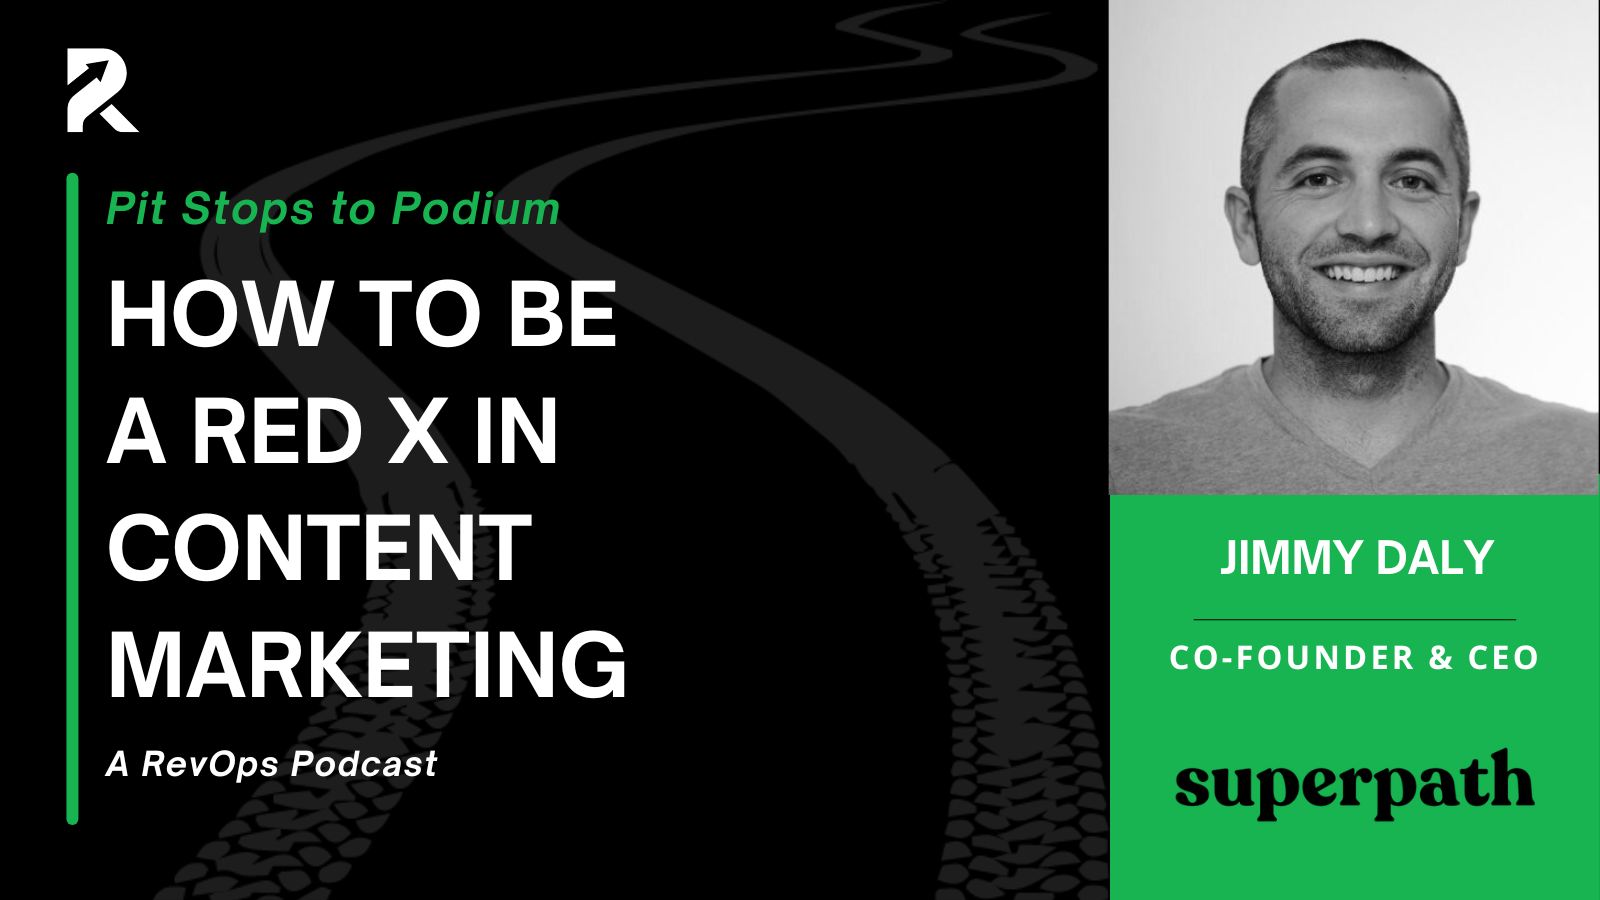 Podcast Pit Stop: Jimmy Daly on How to be a Red X in Content Marketing